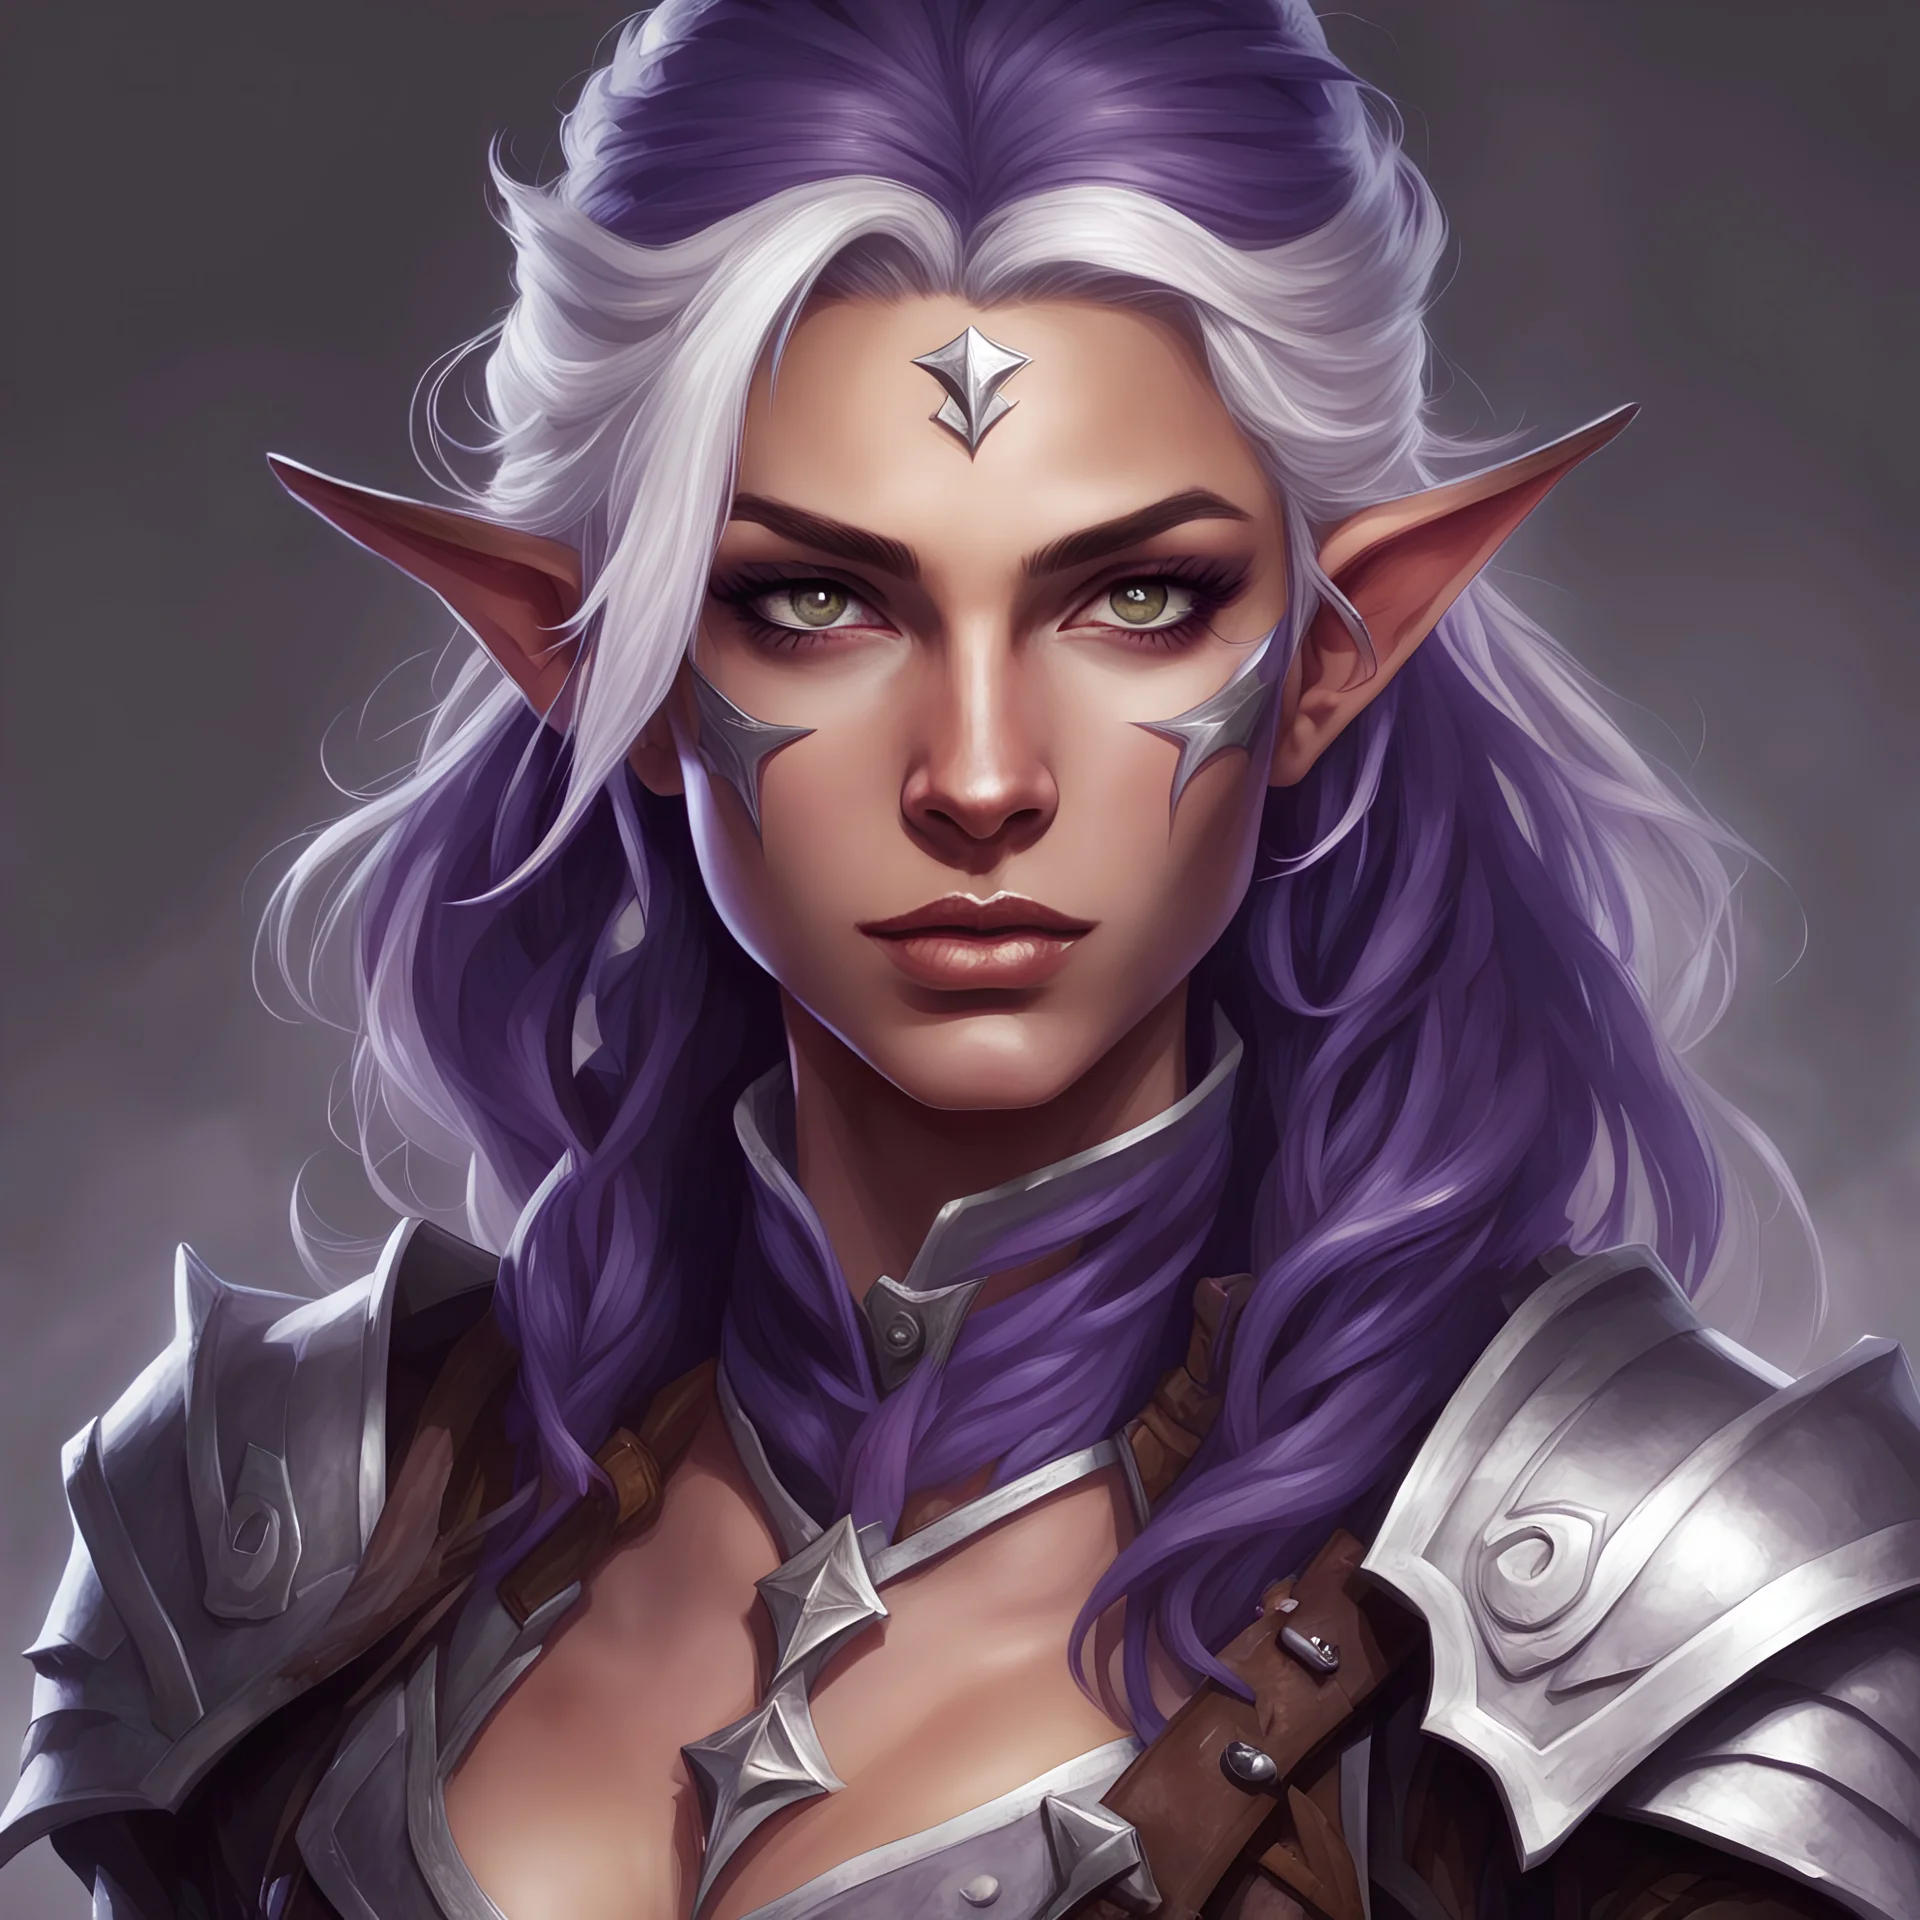 Generate a dungeons and dragons character portrait of the face of a female Half-Elf. She is a hexblade warlock. Her hair is White and Silver and voluminous. Her skin is tanned. Her eyes are deep purple. She wears leather armor in the aesthetic of a pirate.